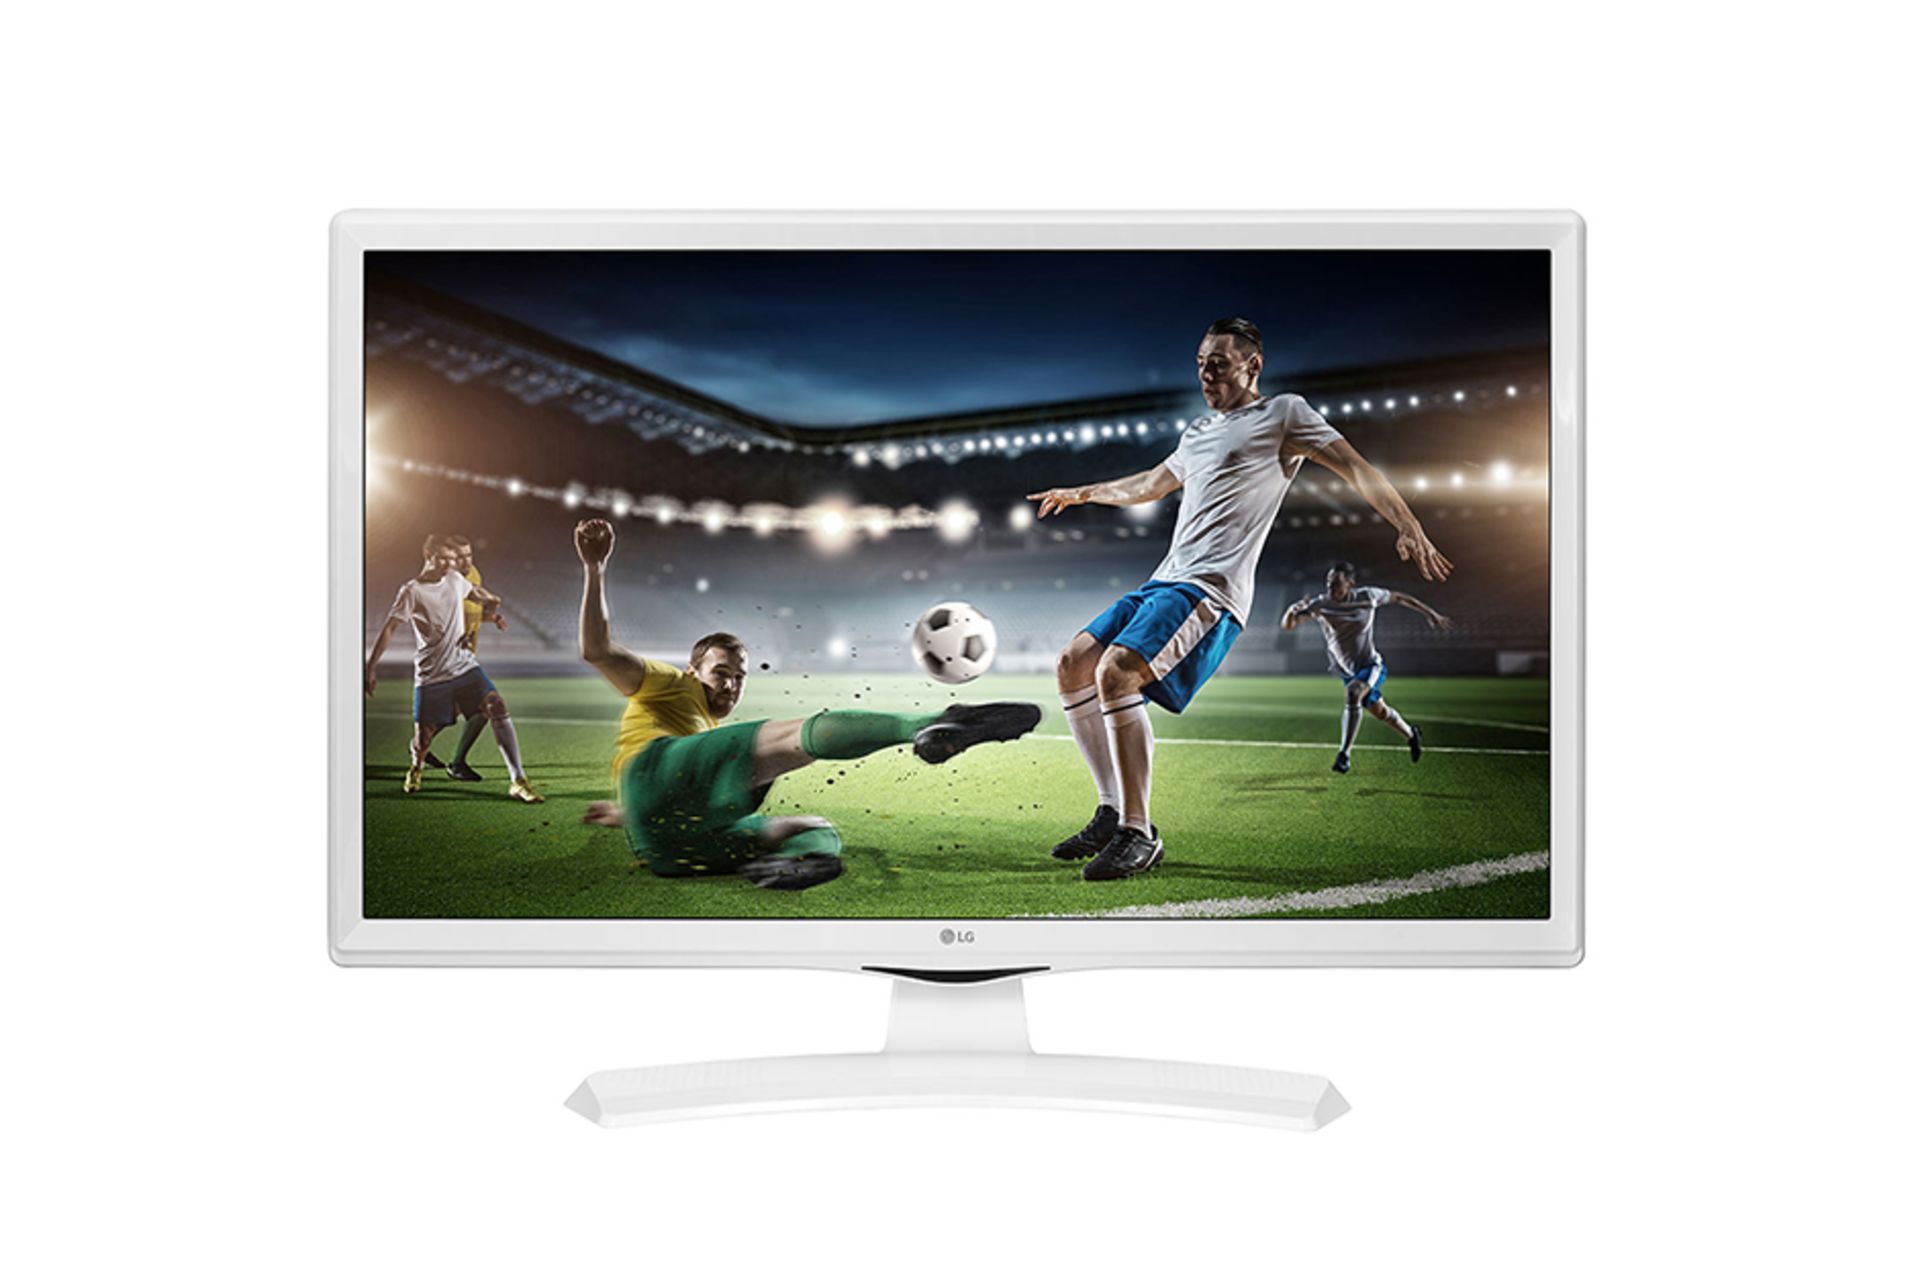 + VAT Grade A LG 24 Inch HD READY LED TV WITH FREEVIEW HD - WHITE 24TK410U-WZ